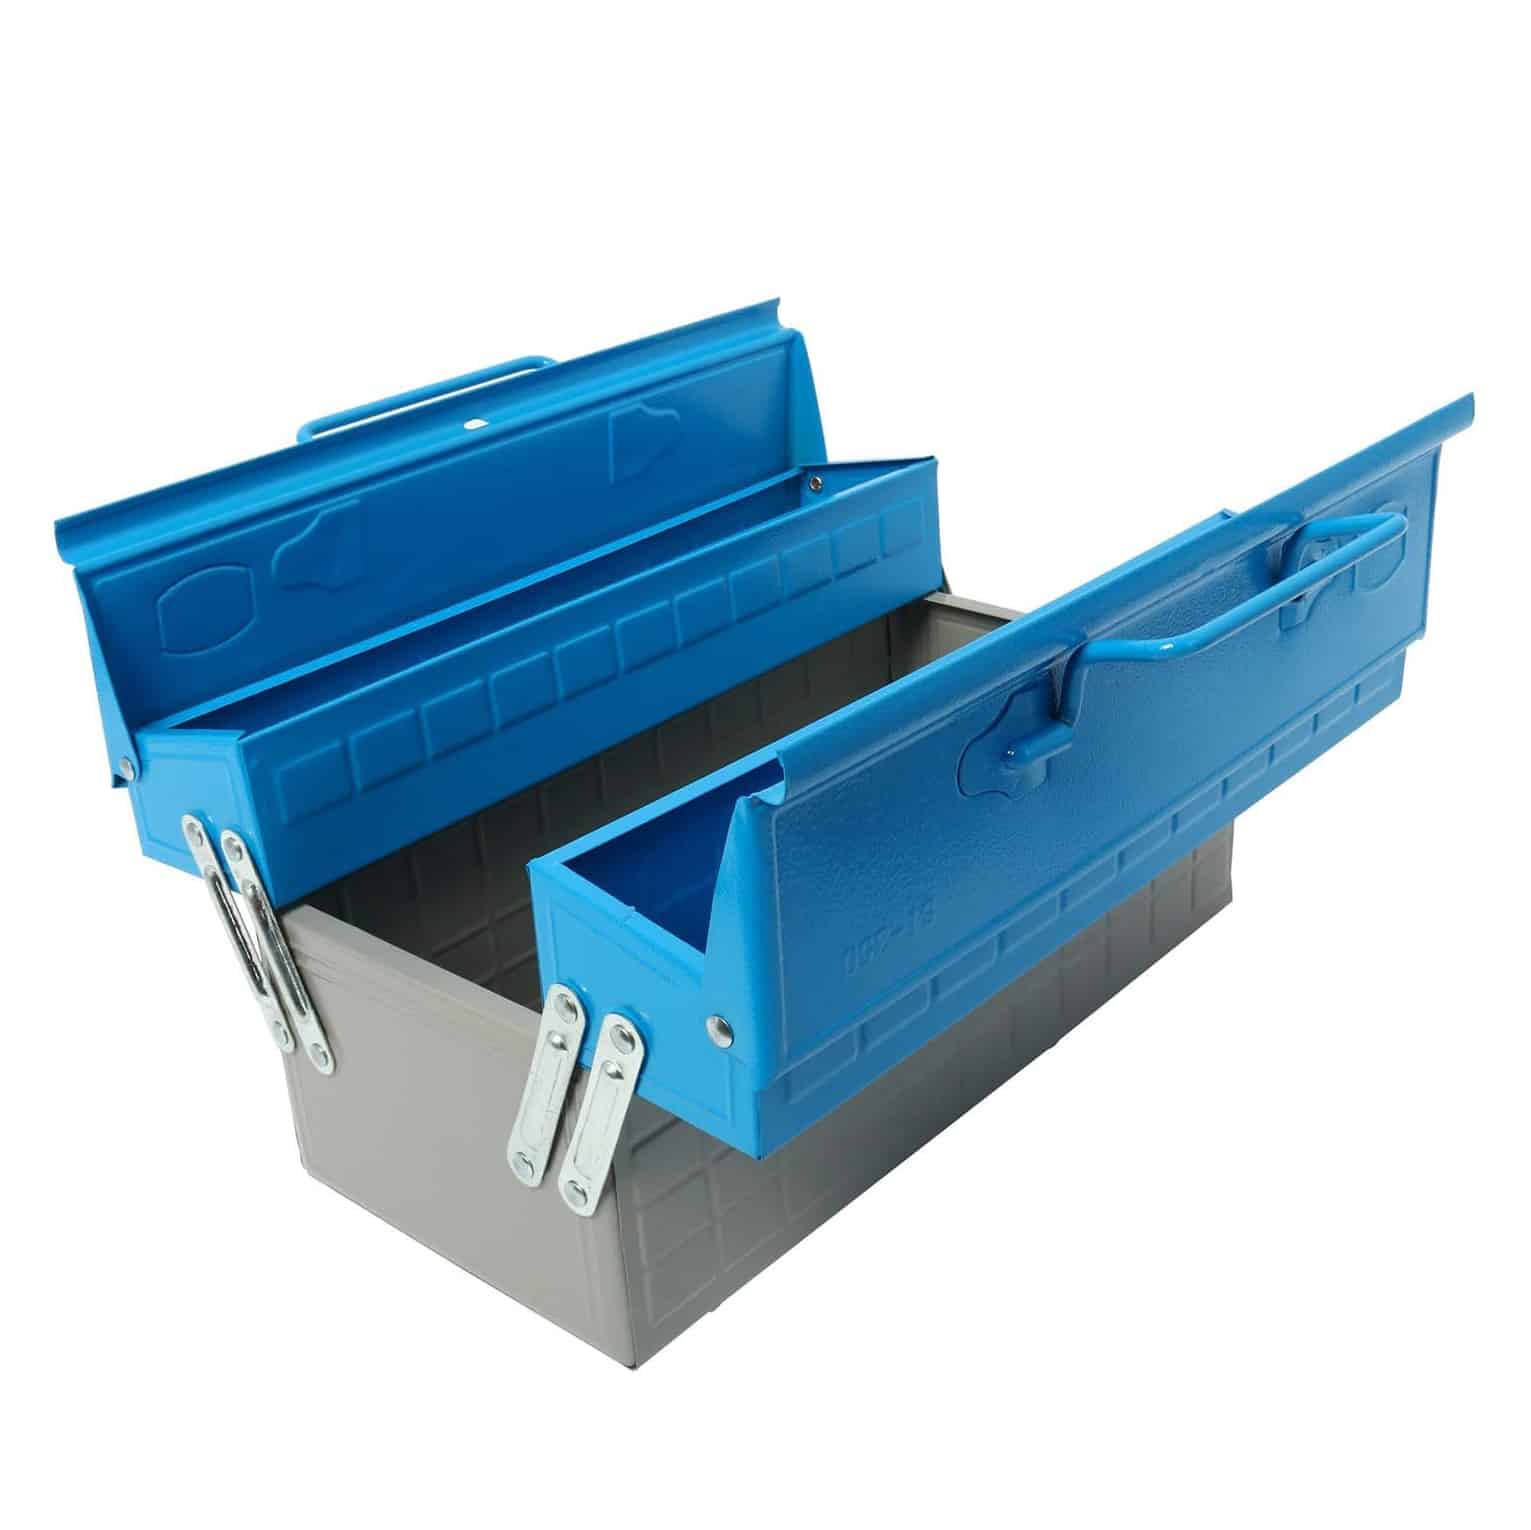 Top 10 Best Cantilever Tool Boxes In 2021 Reviews